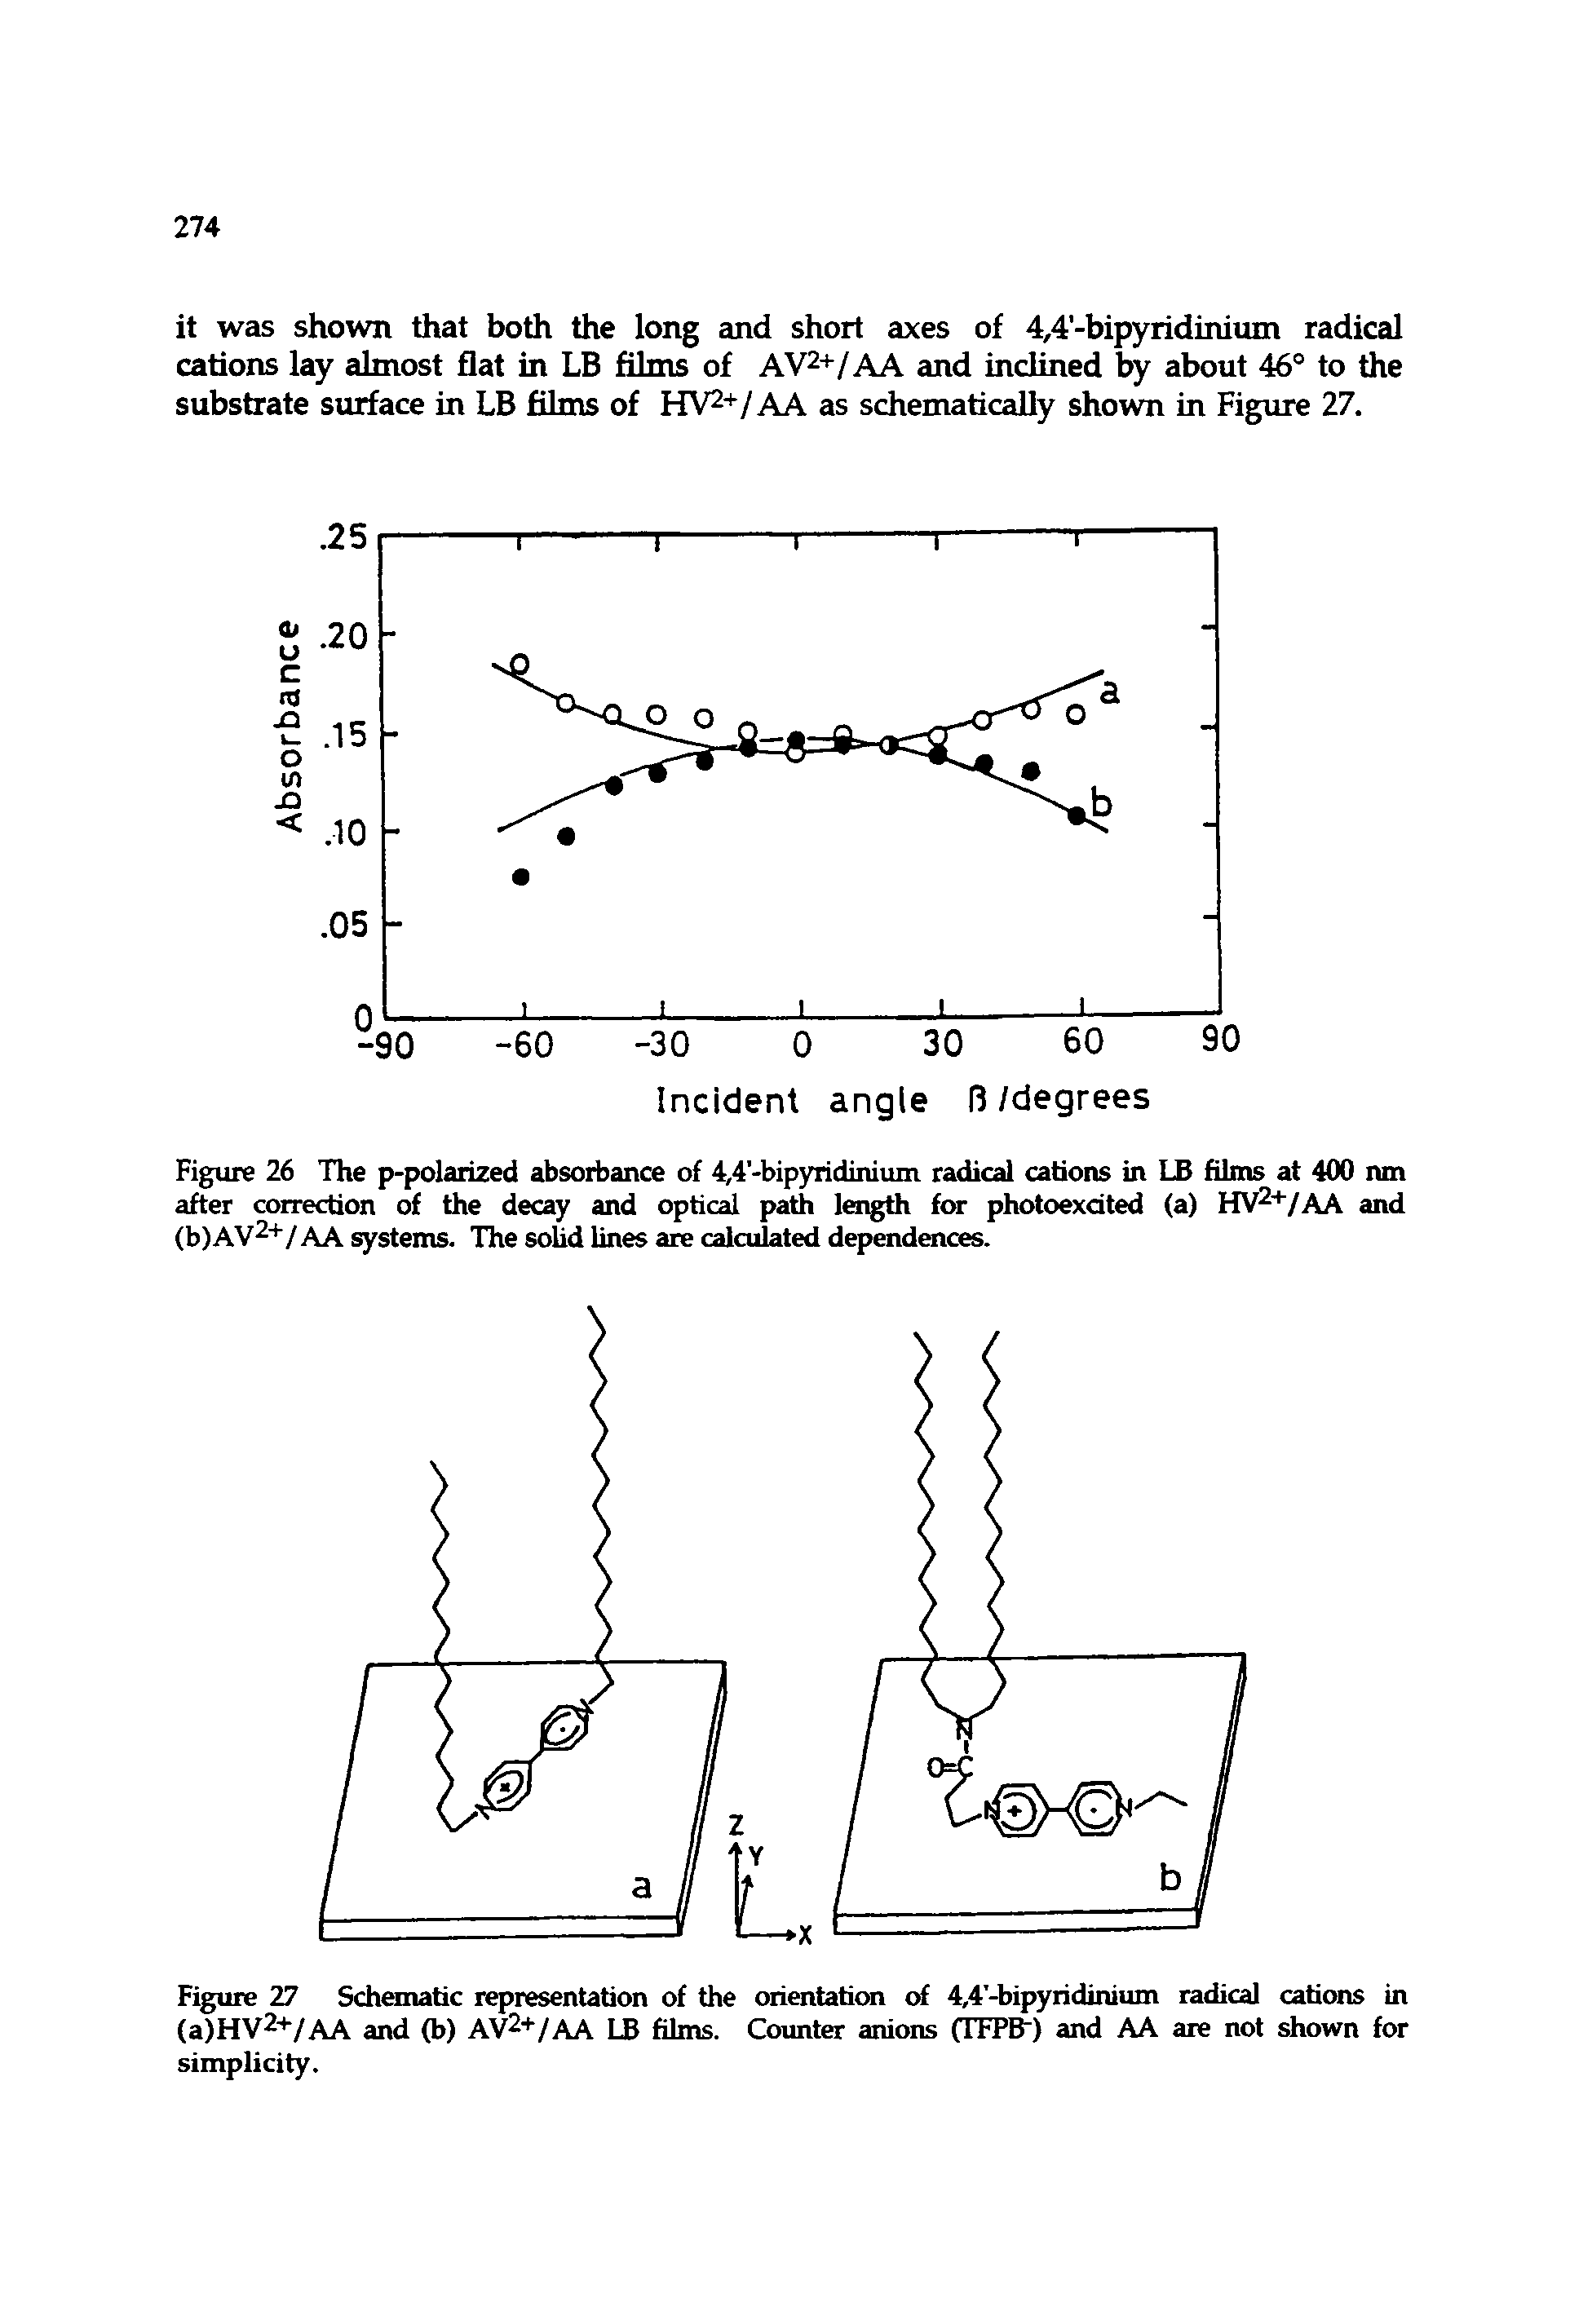 Figure 26 The p-polarized absorbance of 4,4,-bipyridinium radical cations in LB films at 400 ran after correction of the decay and optical path length for photoexdted (a) HV2+/AA and (b)AV2+/AA systems. The solid lines are calculated dependences.